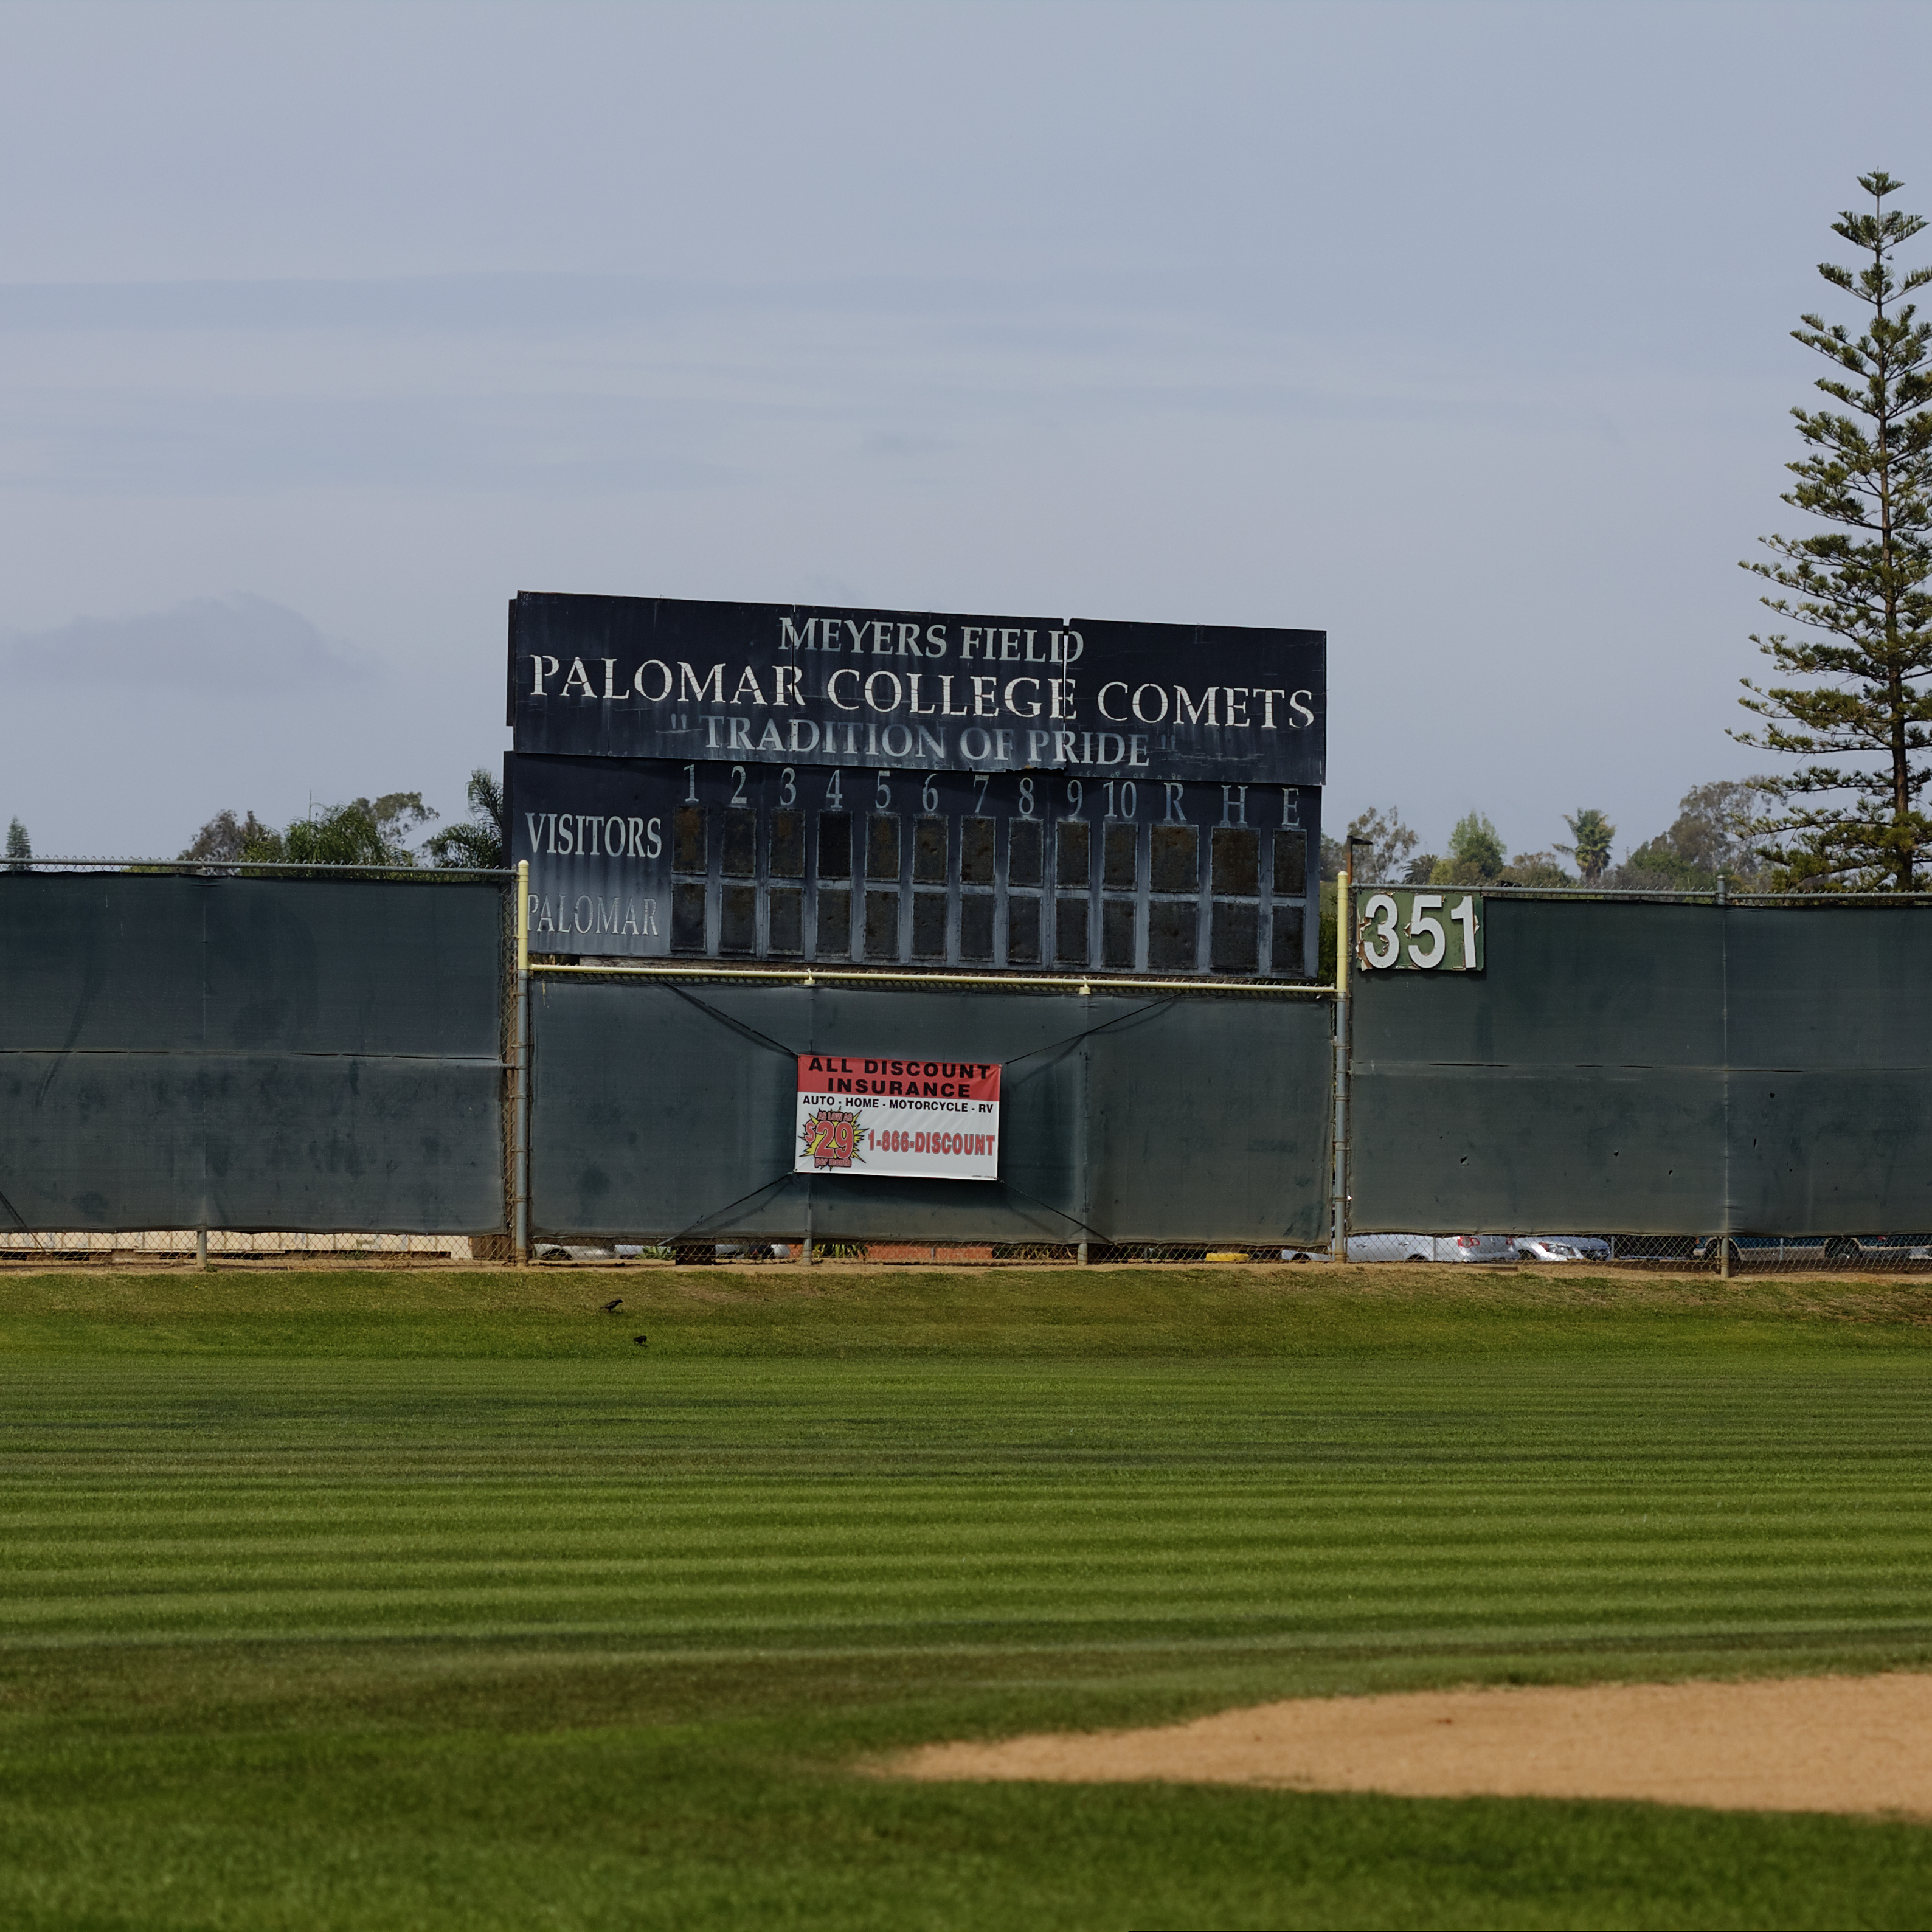 An old Palomar College scoreboard at the baseball field. The text on top of the board reads "MEYER'S FIELD PALOMAR COLLEGE COMETS "TRADITION AND PRIDE."